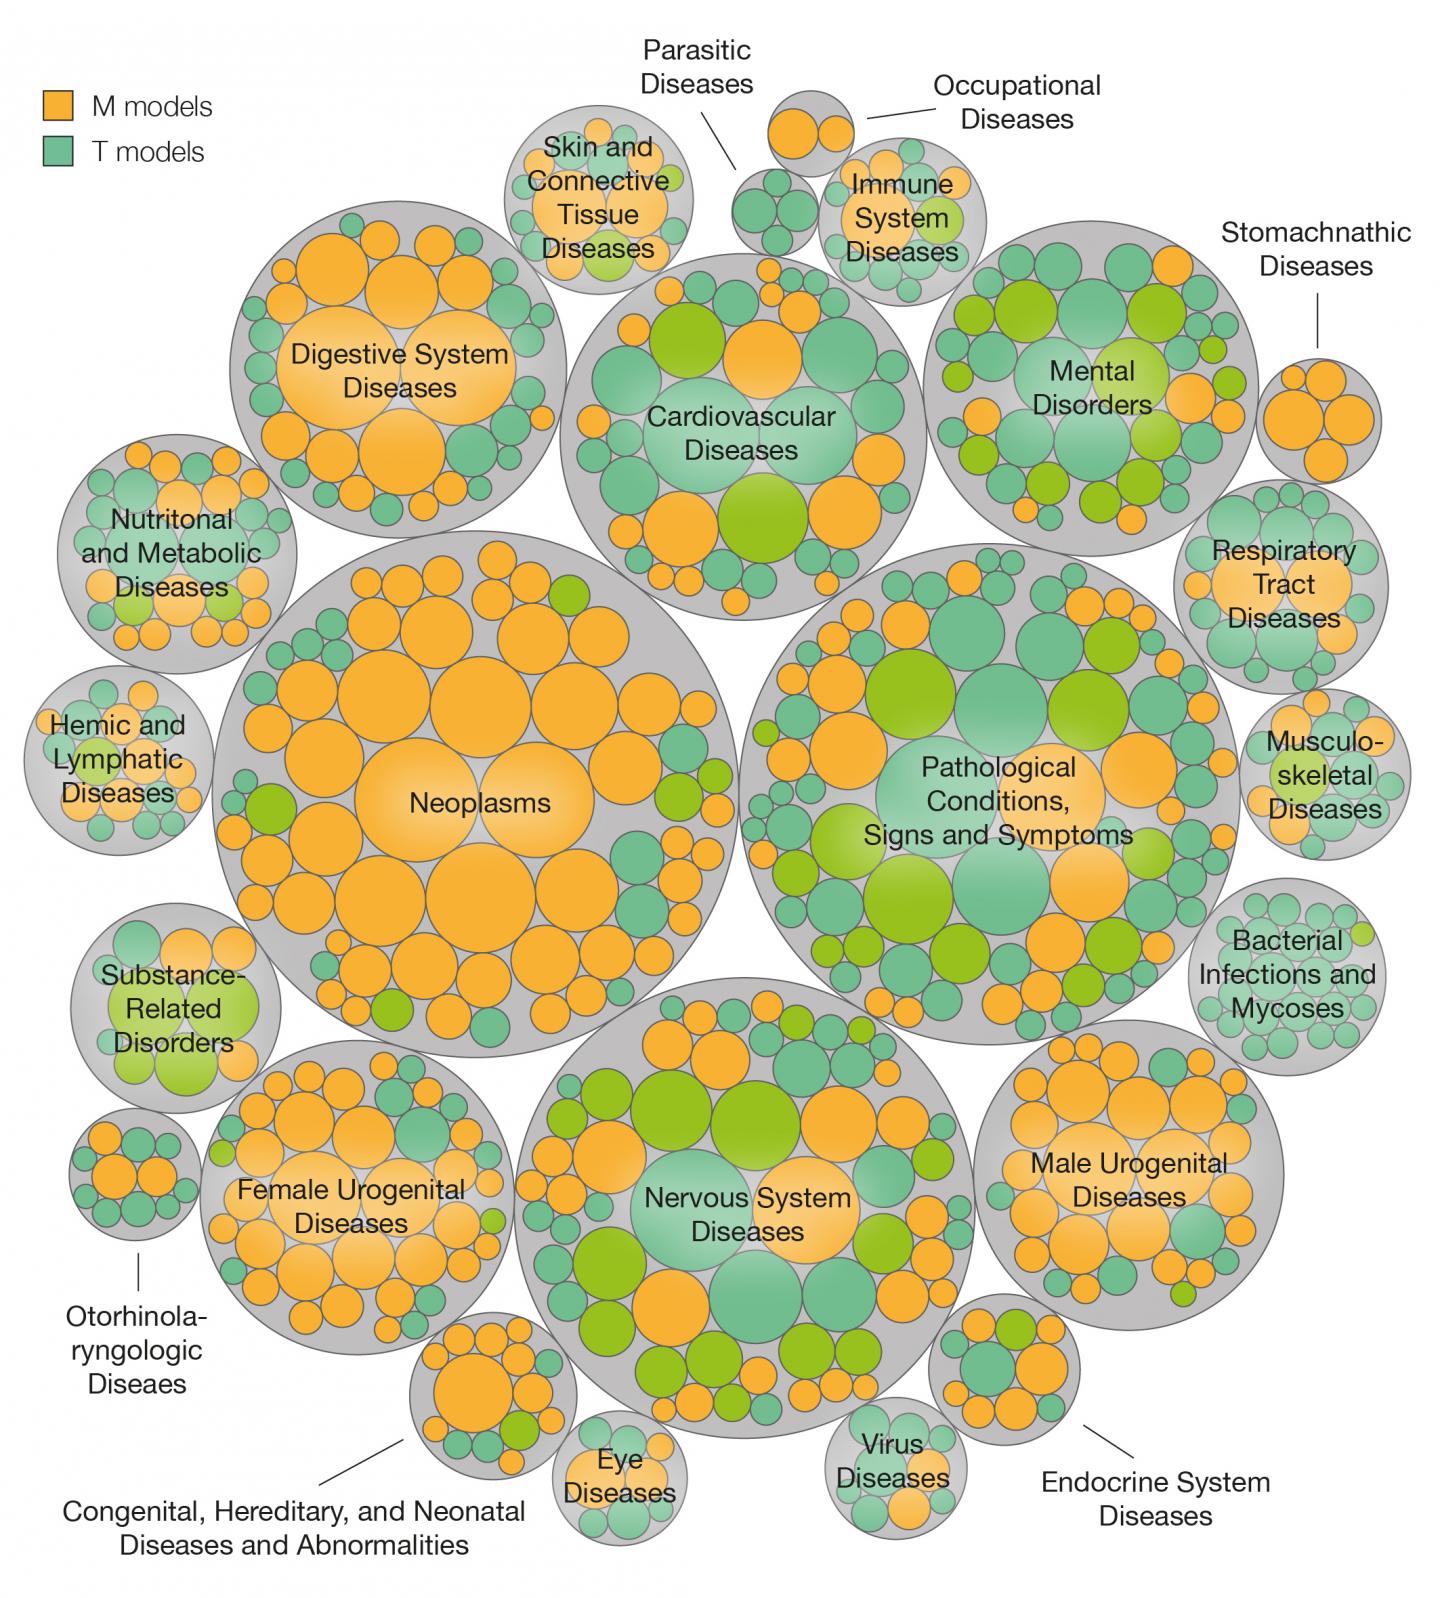 Predictive Model of Chemical Substances and Their Association with Human Diseases